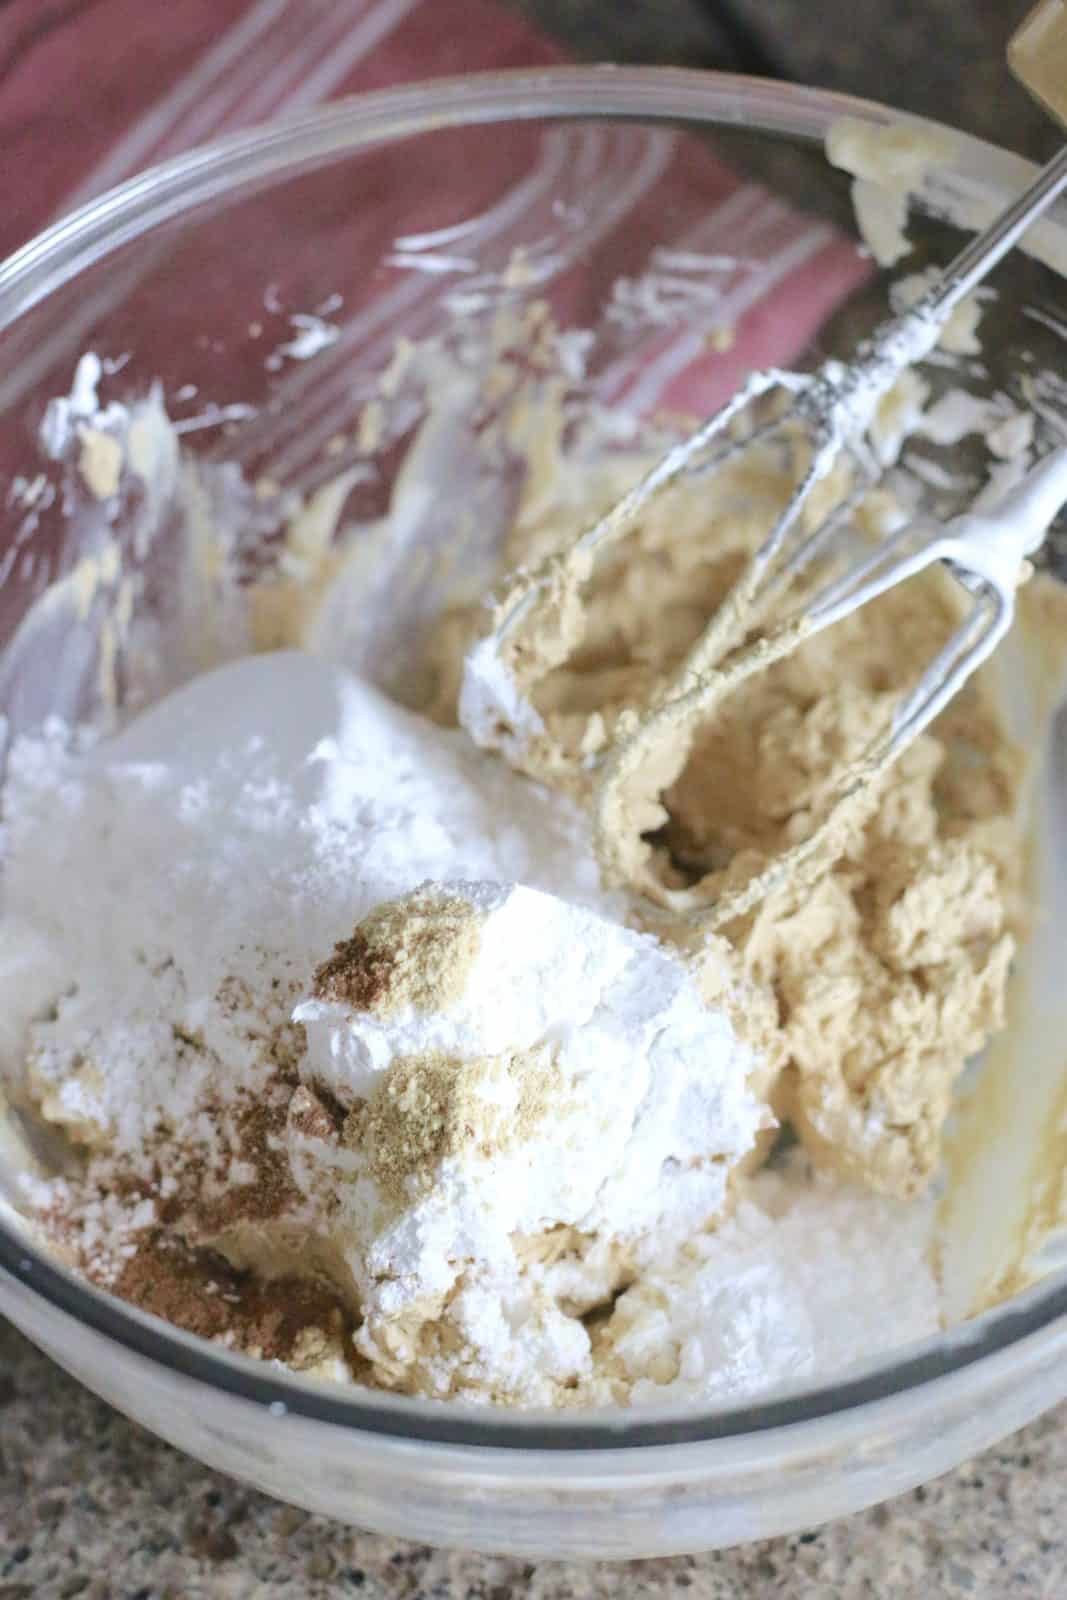 powdered sugar and spices added to molasses butter mixture in a clear bowl.